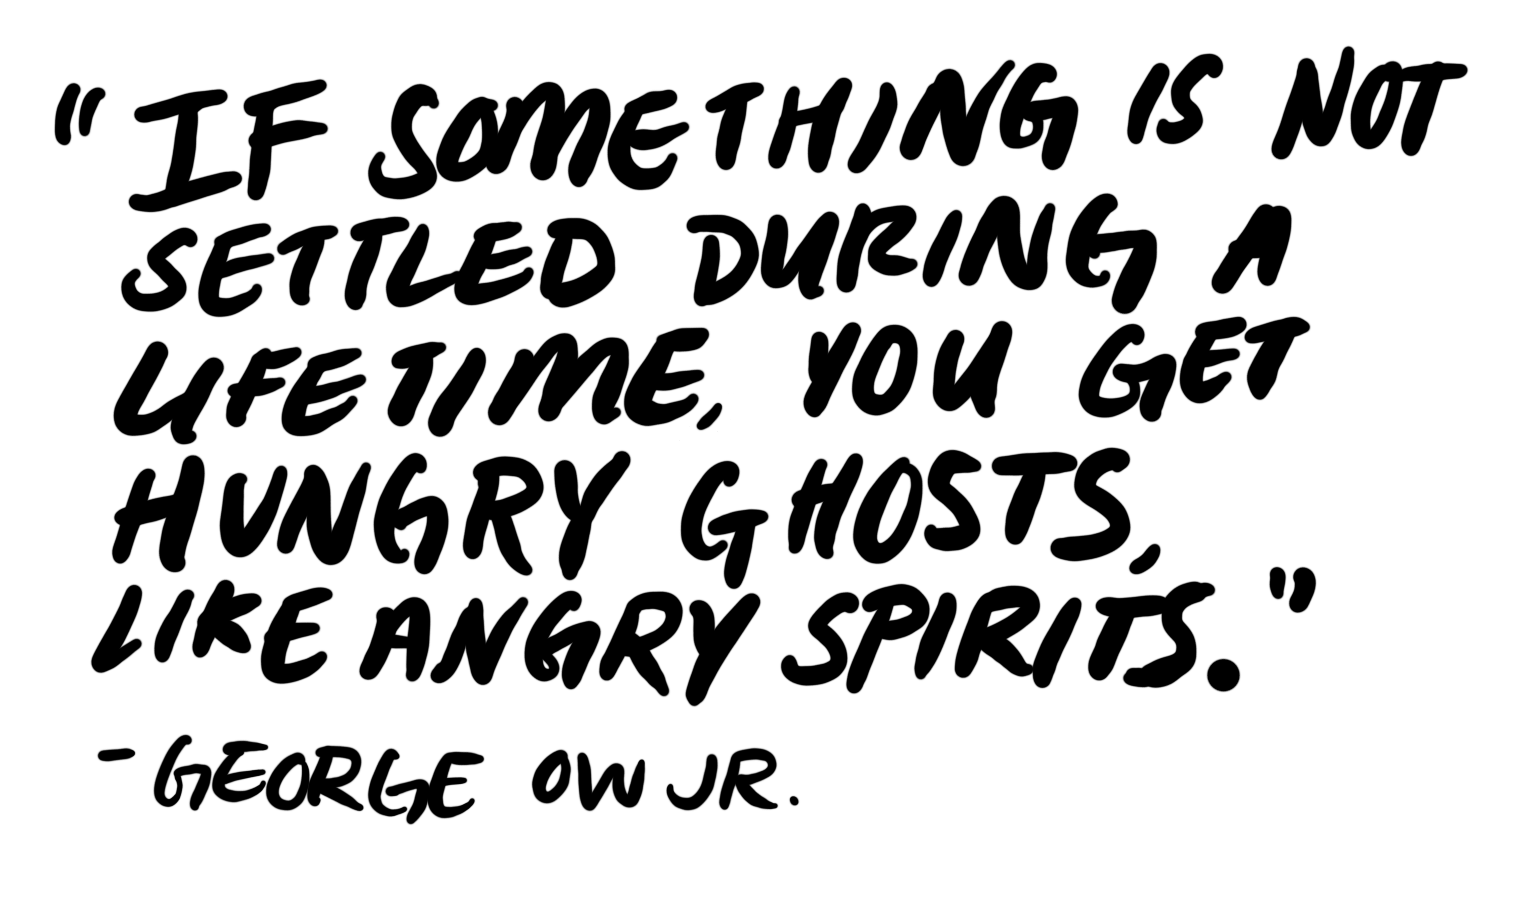 Quote reading "If something is not settled during a lifetime, you get hungry ghosts, like angry spirits." By George Ow Jr.